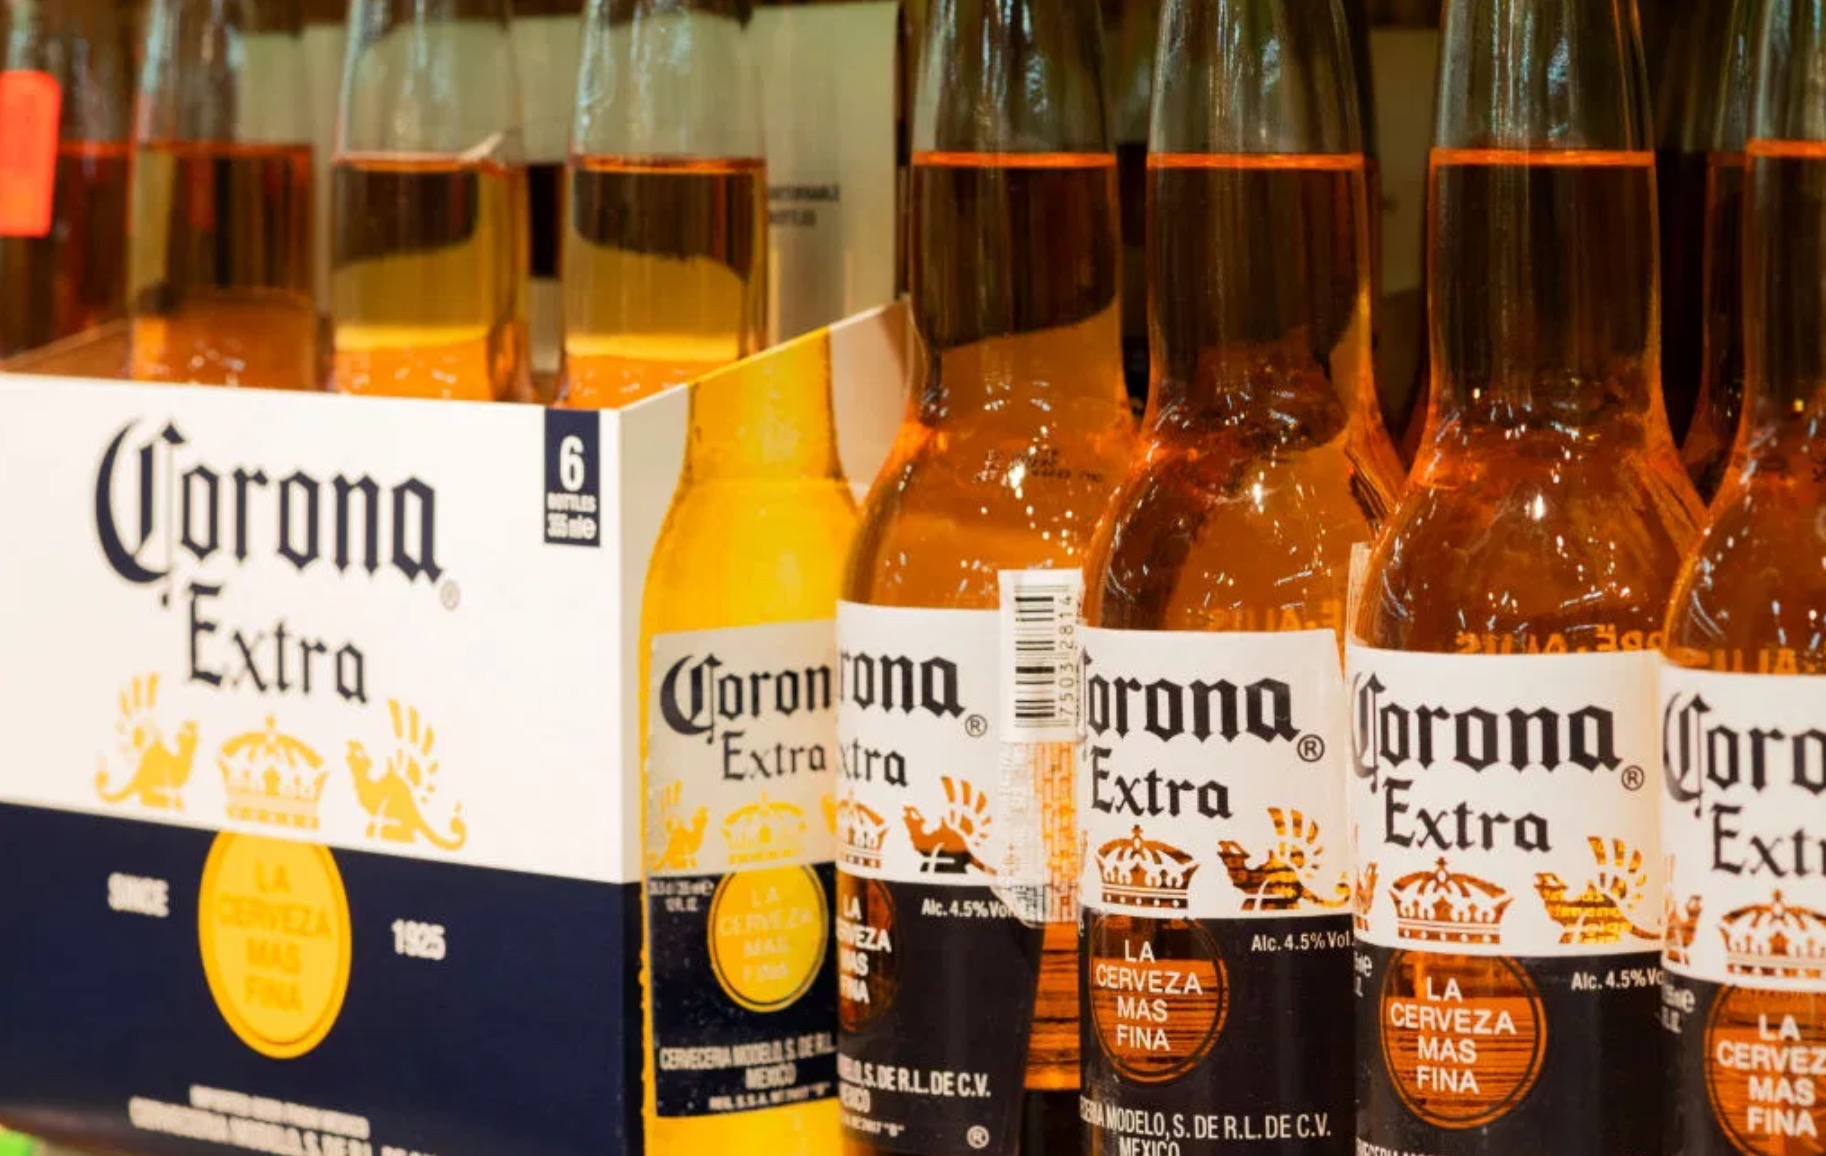 Corona Beer Deemed to be Non-Essential Due to Corona Crisis